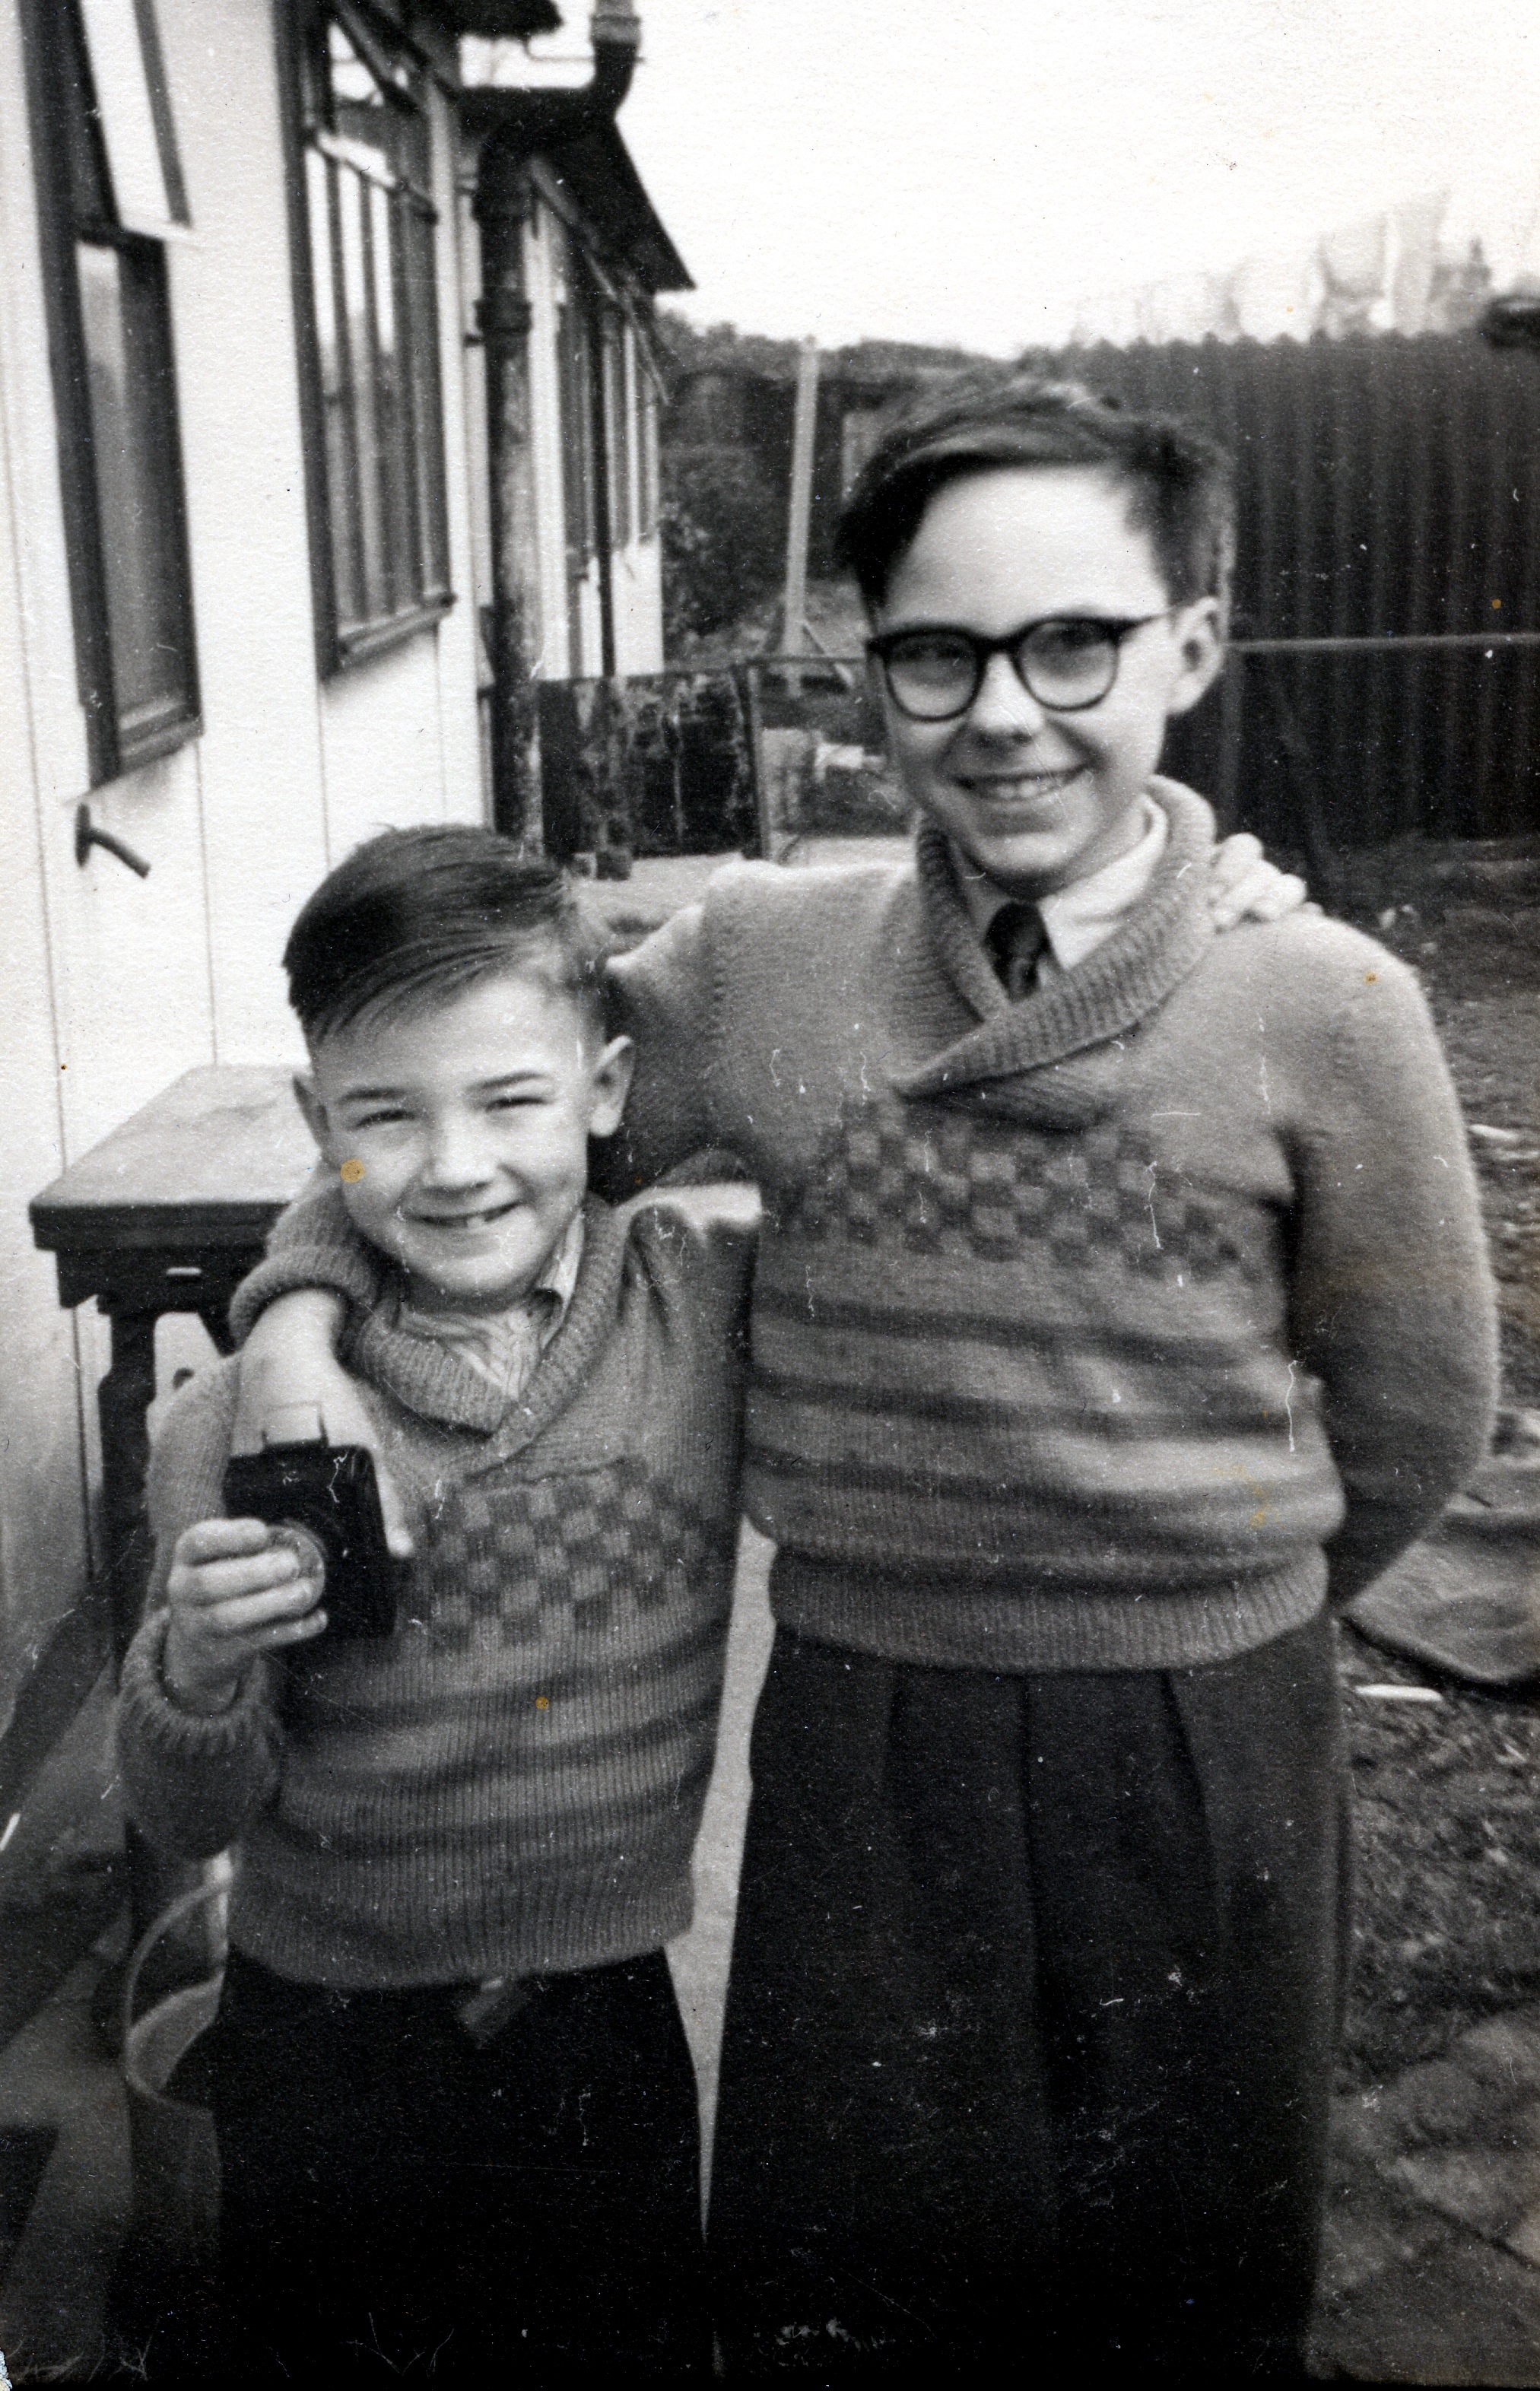 John and his brother outside the prefab in Underhill Road, London SE22